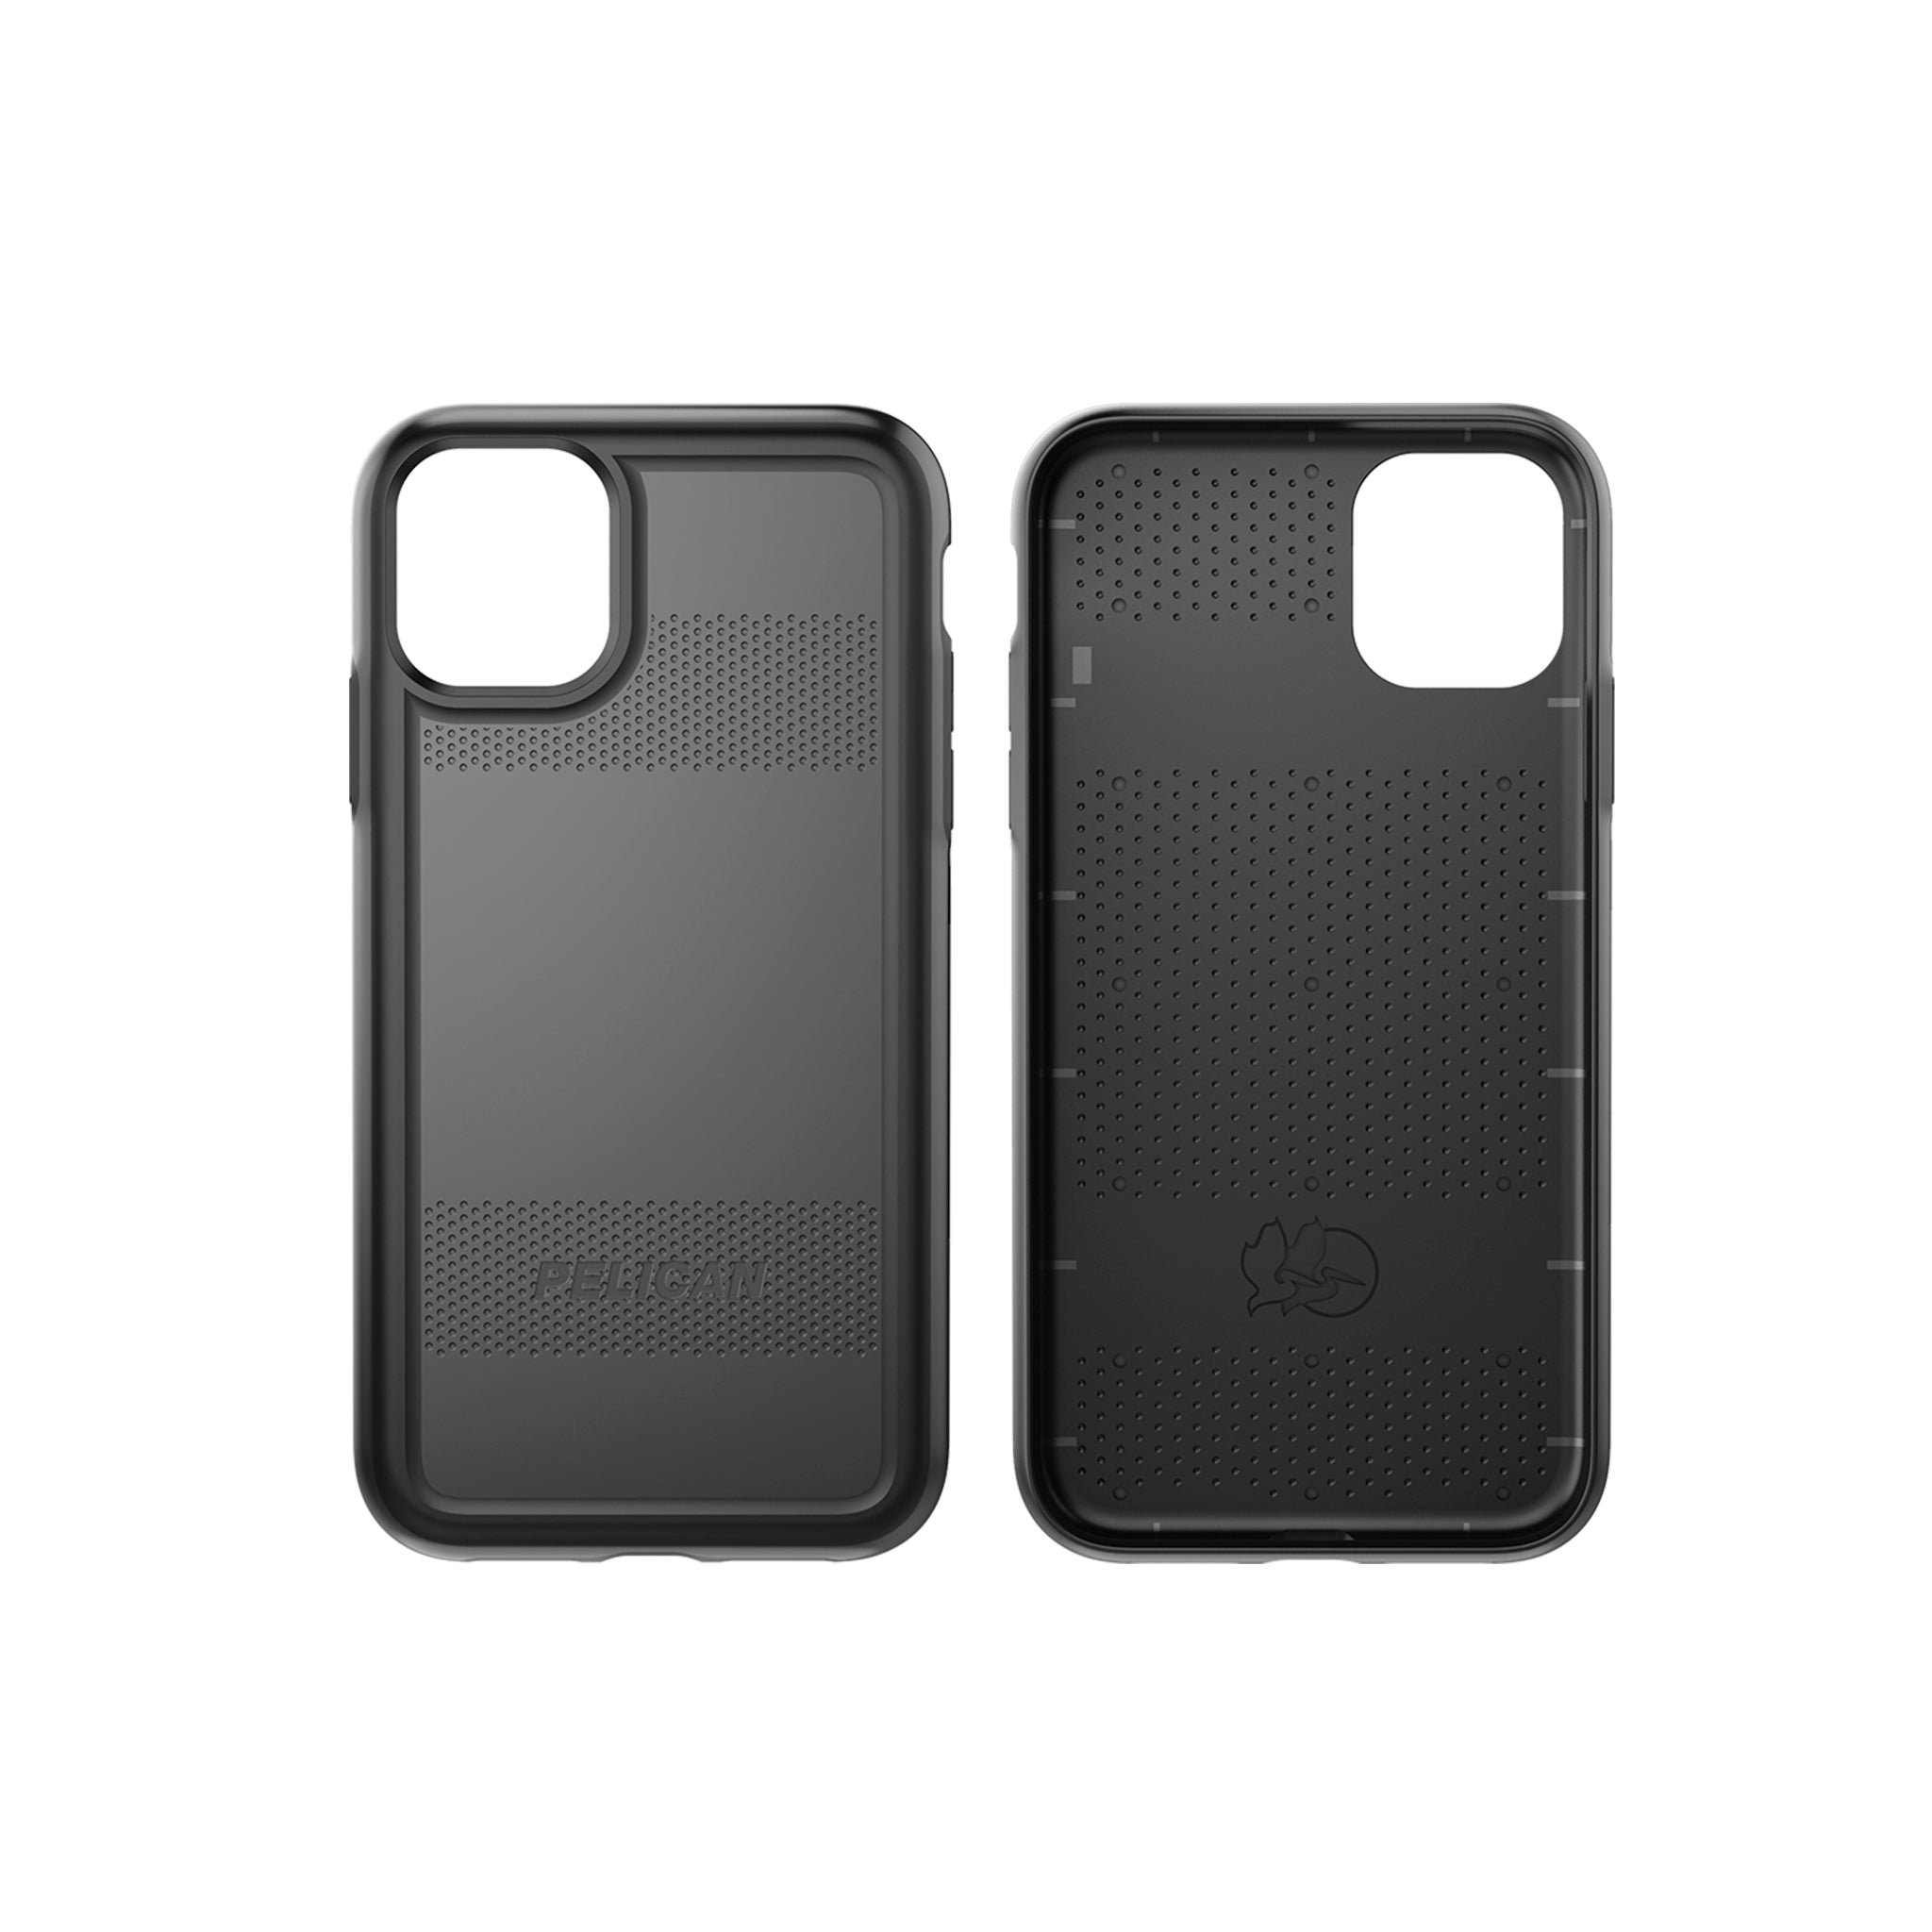 Pelican - Protector Case For Apple iPhone 11 Pro Max / Xs Max - Black